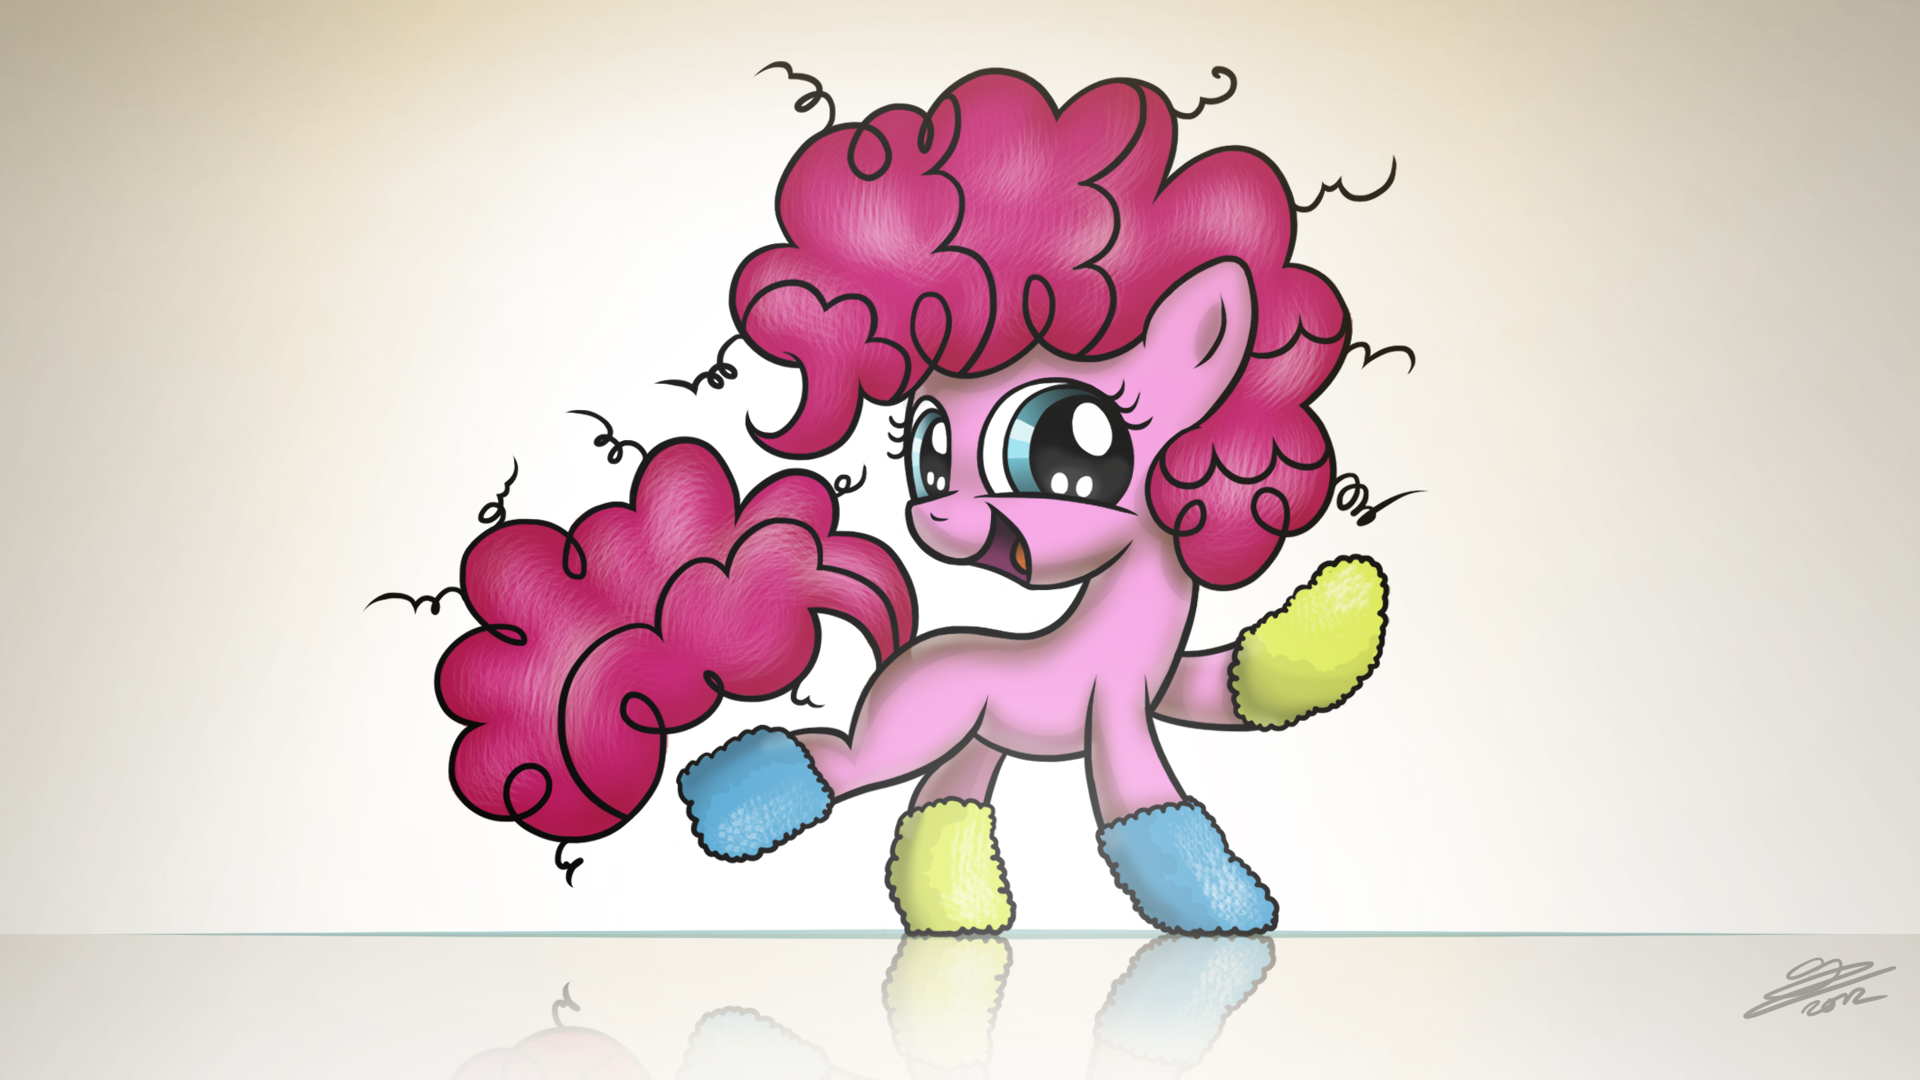 Filly Pinkie says thank you!